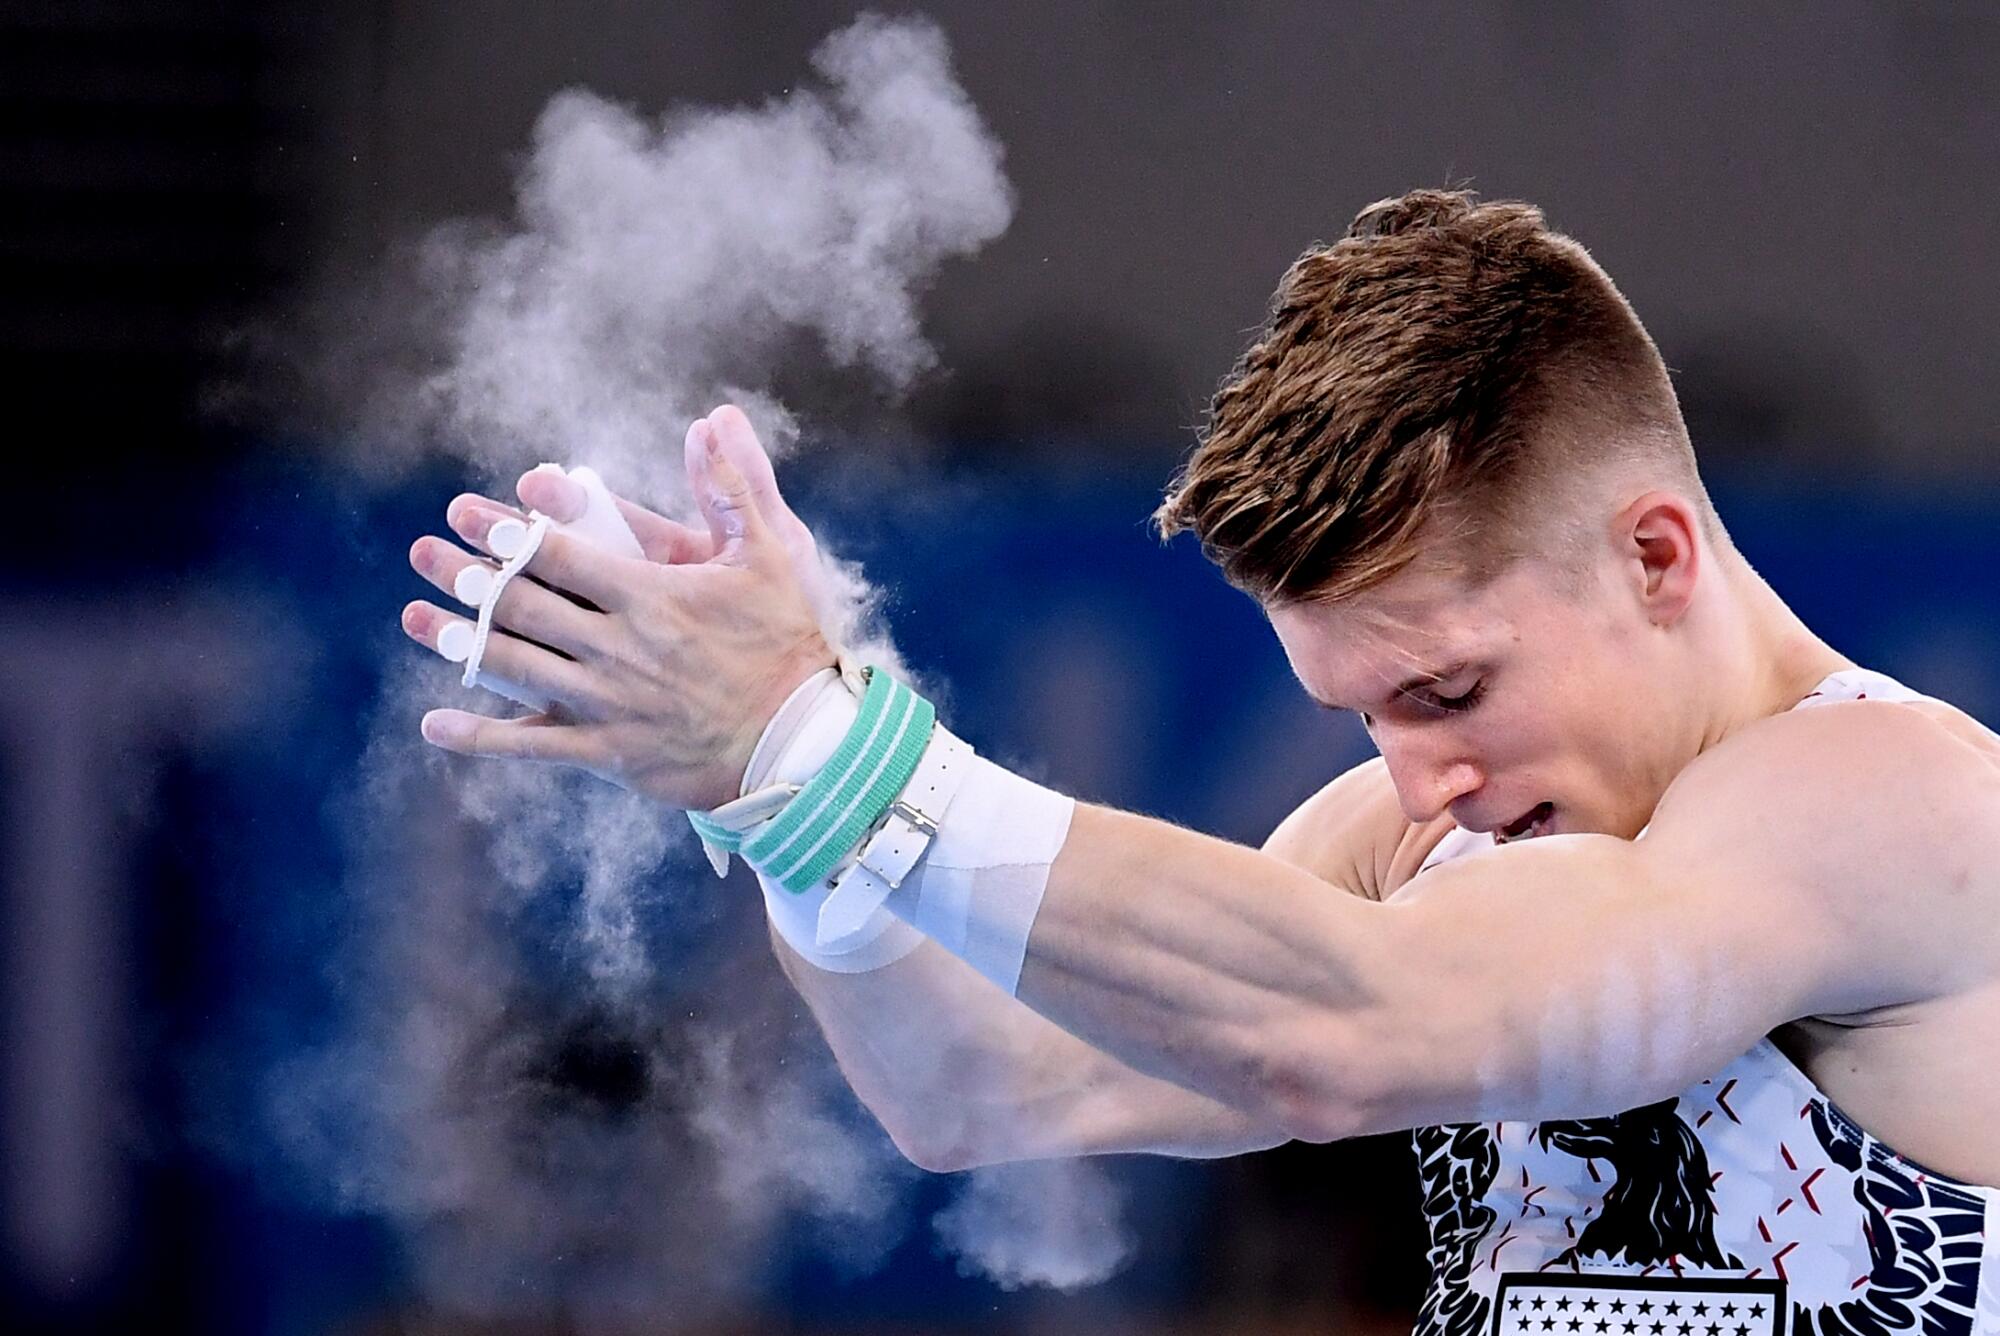  USA's Shane Wiskus celebrates after competing on the high bar.